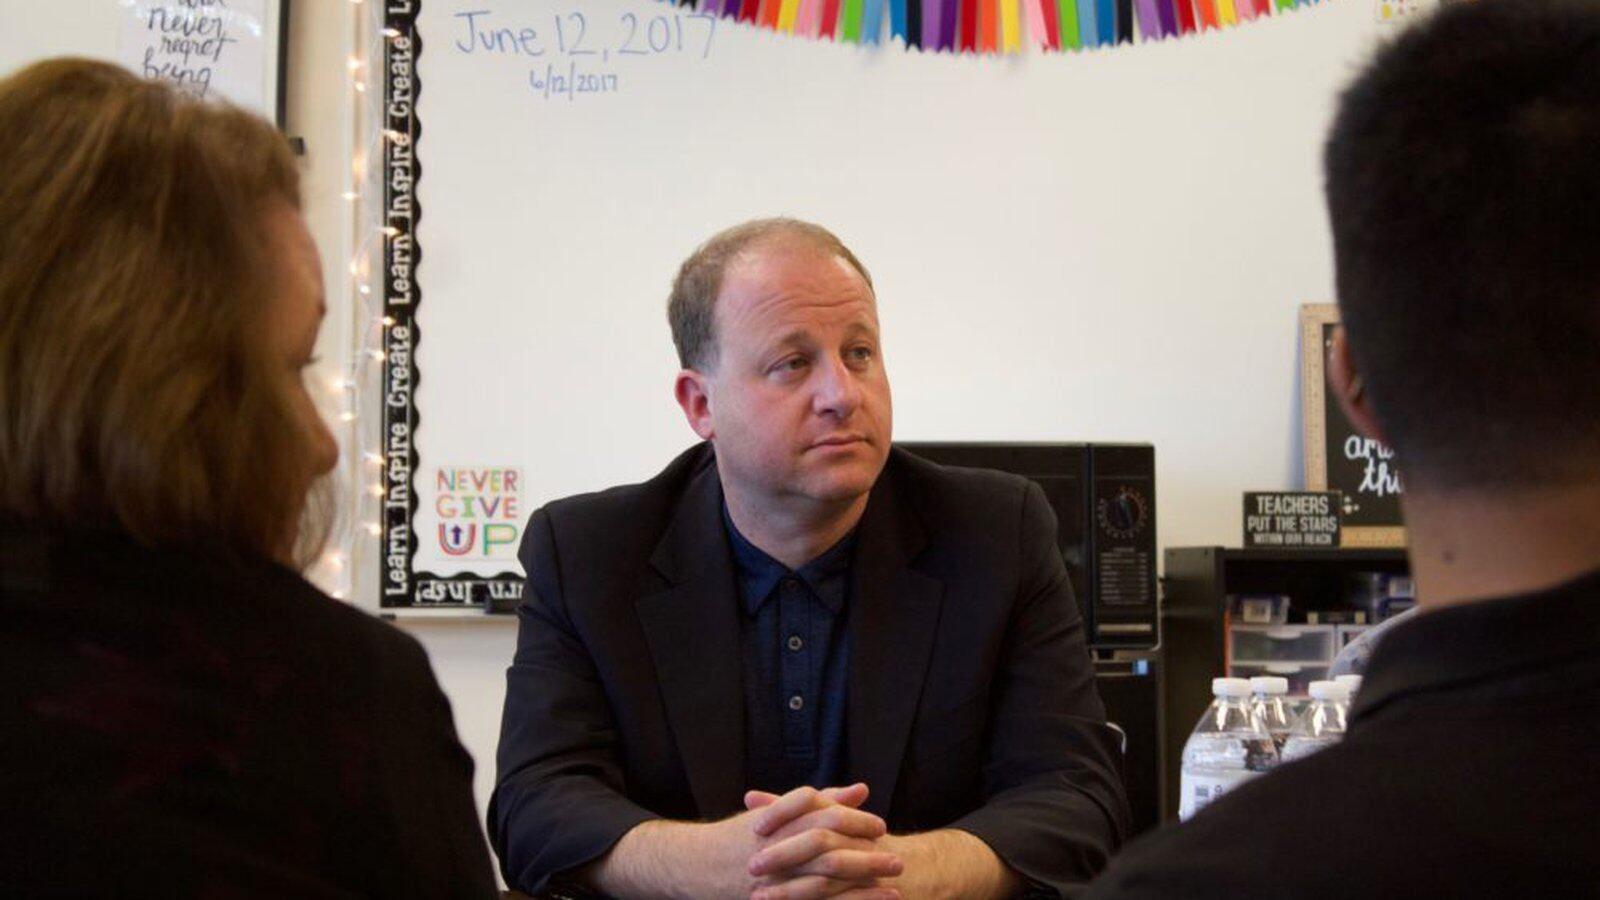 Congressman Jared Polis meets with teachers, parents and students at the Academy of Urban Learning in Denver after announcing his gubernatorial campaign. (Photo by Nic Garcia/Chalkbeat)